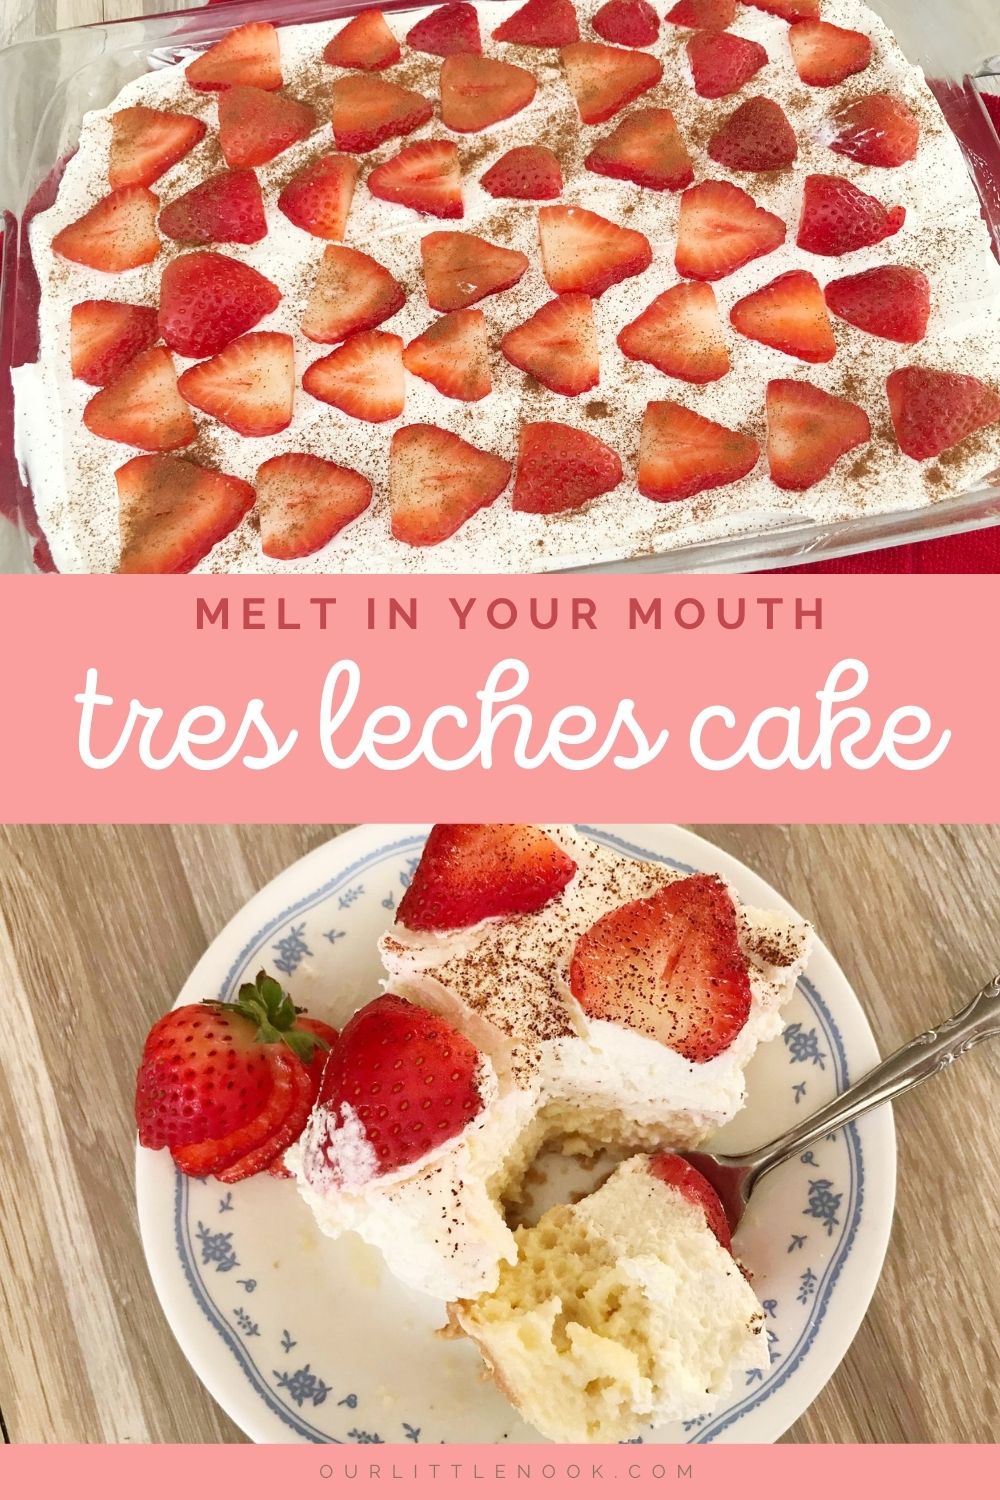 Gluten Free and Lovin' It! Amazing Tres Leches Cake